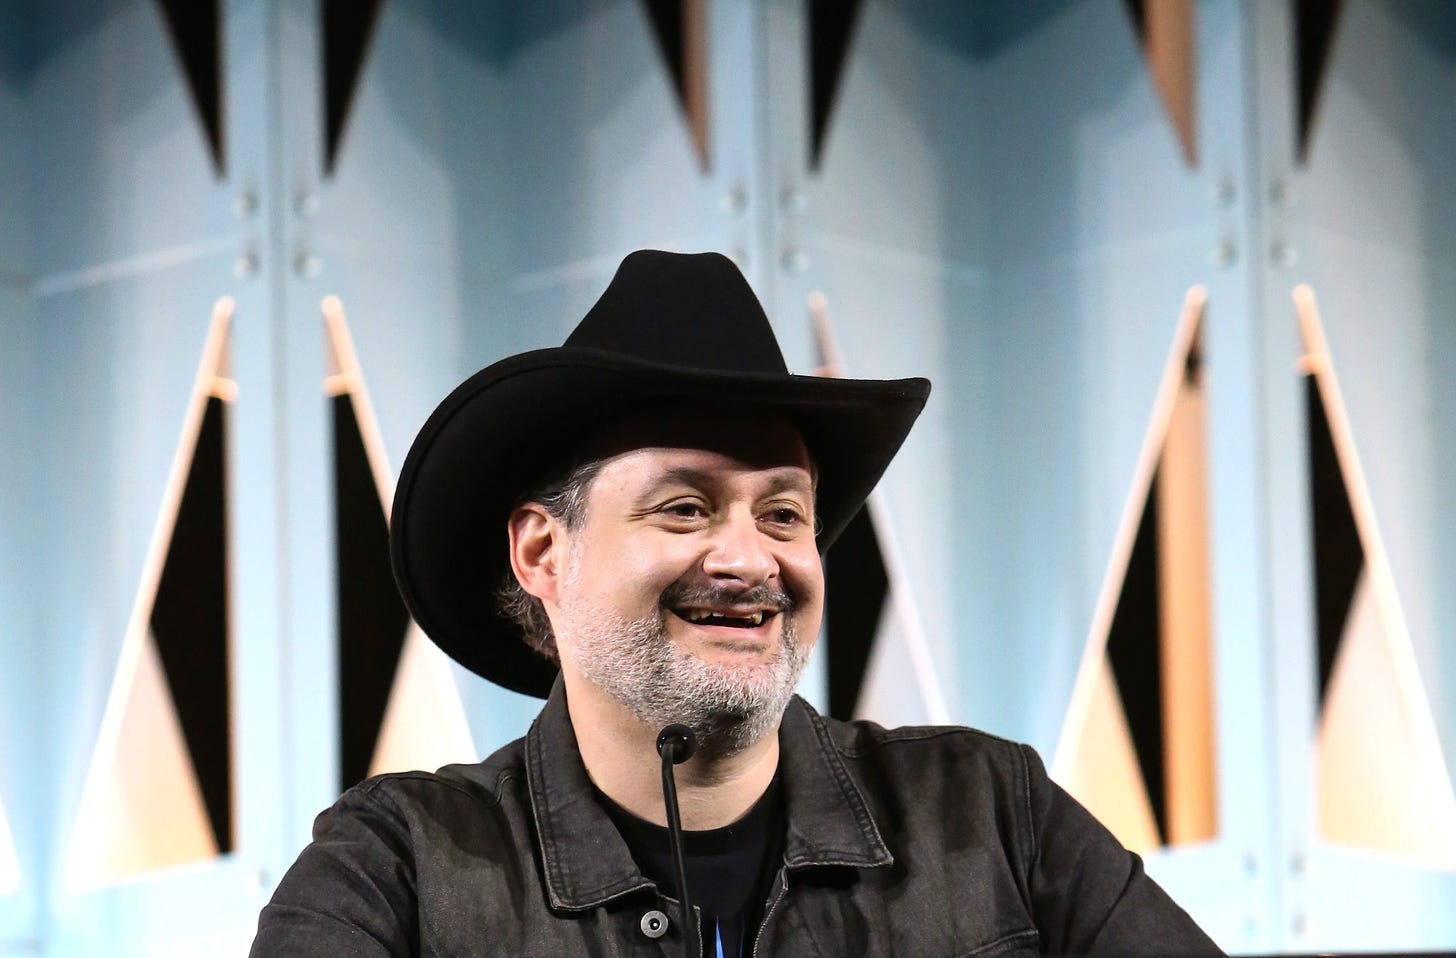 Dave Filoni attends the panel for The Mandalorian series at Star Wars Celebration in Anaheim, California on May 28, 2022